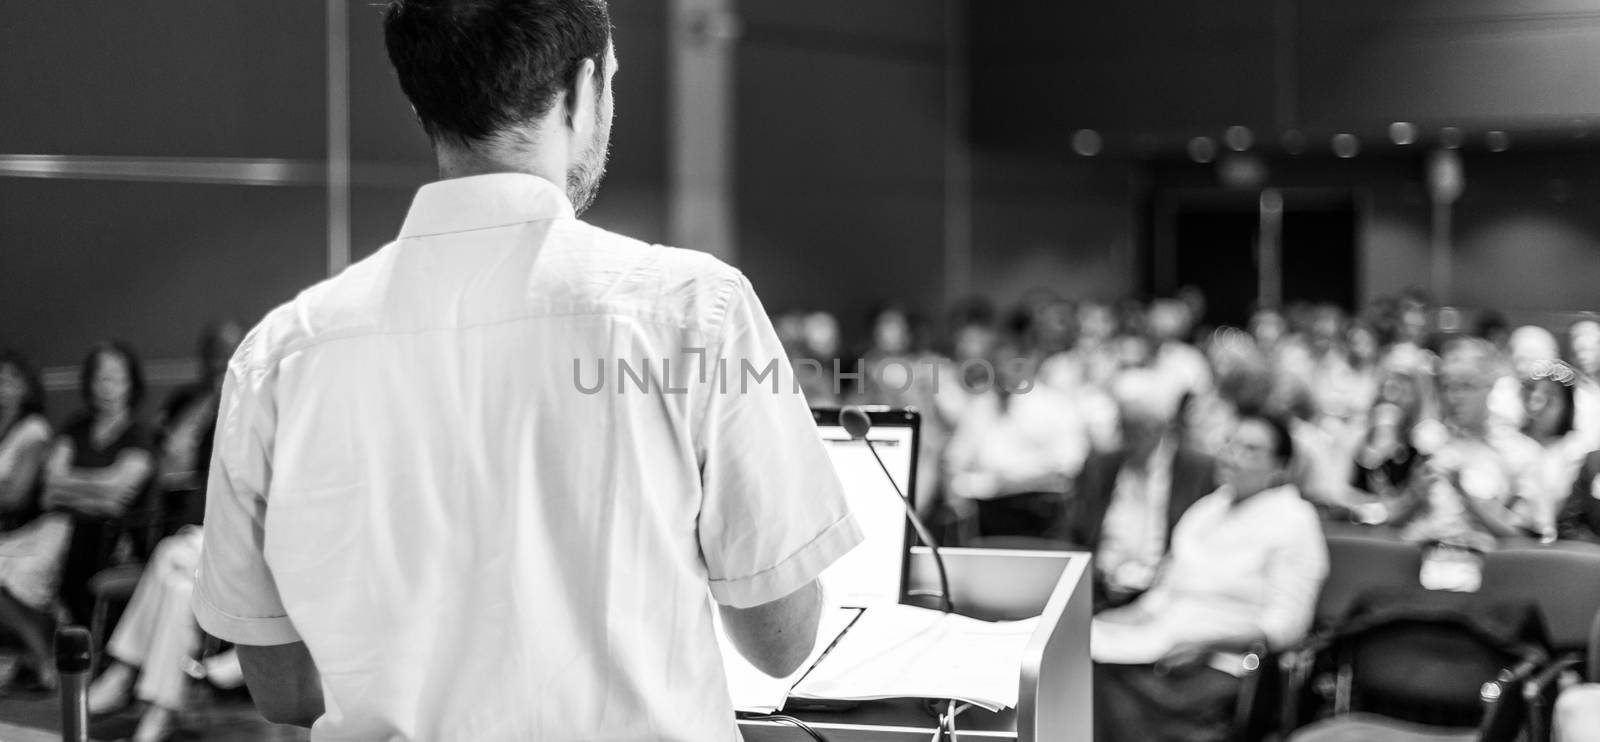 Speaker giving a talk on corporate business conference. Unrecognizable people in audience at conference hall. Business and Entrepreneurship event. Black and white image.